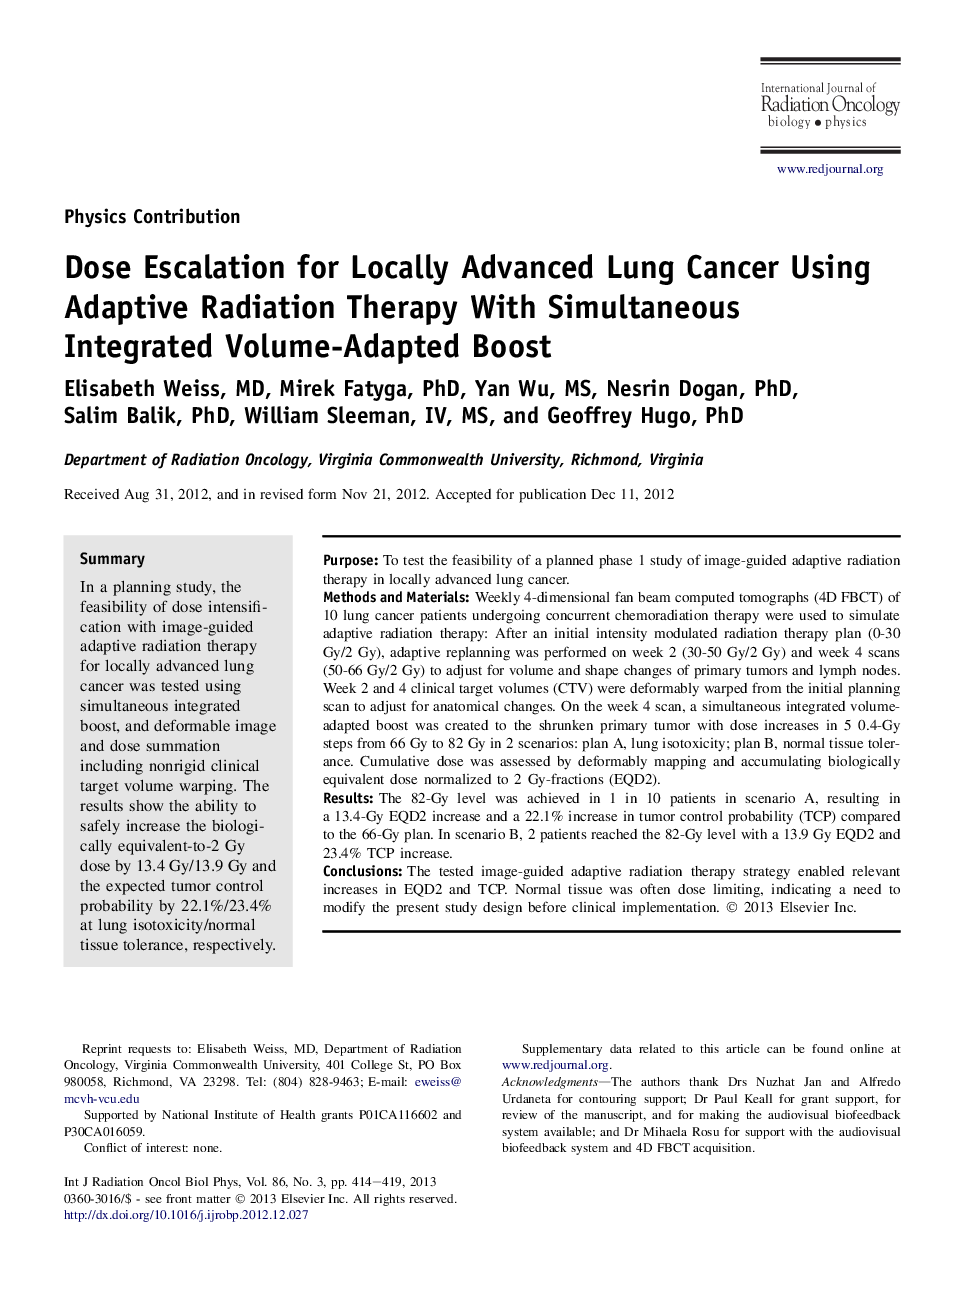 Dose Escalation for Locally Advanced Lung Cancer Using Adaptive Radiation Therapy With Simultaneous Integrated Volume-Adapted Boost